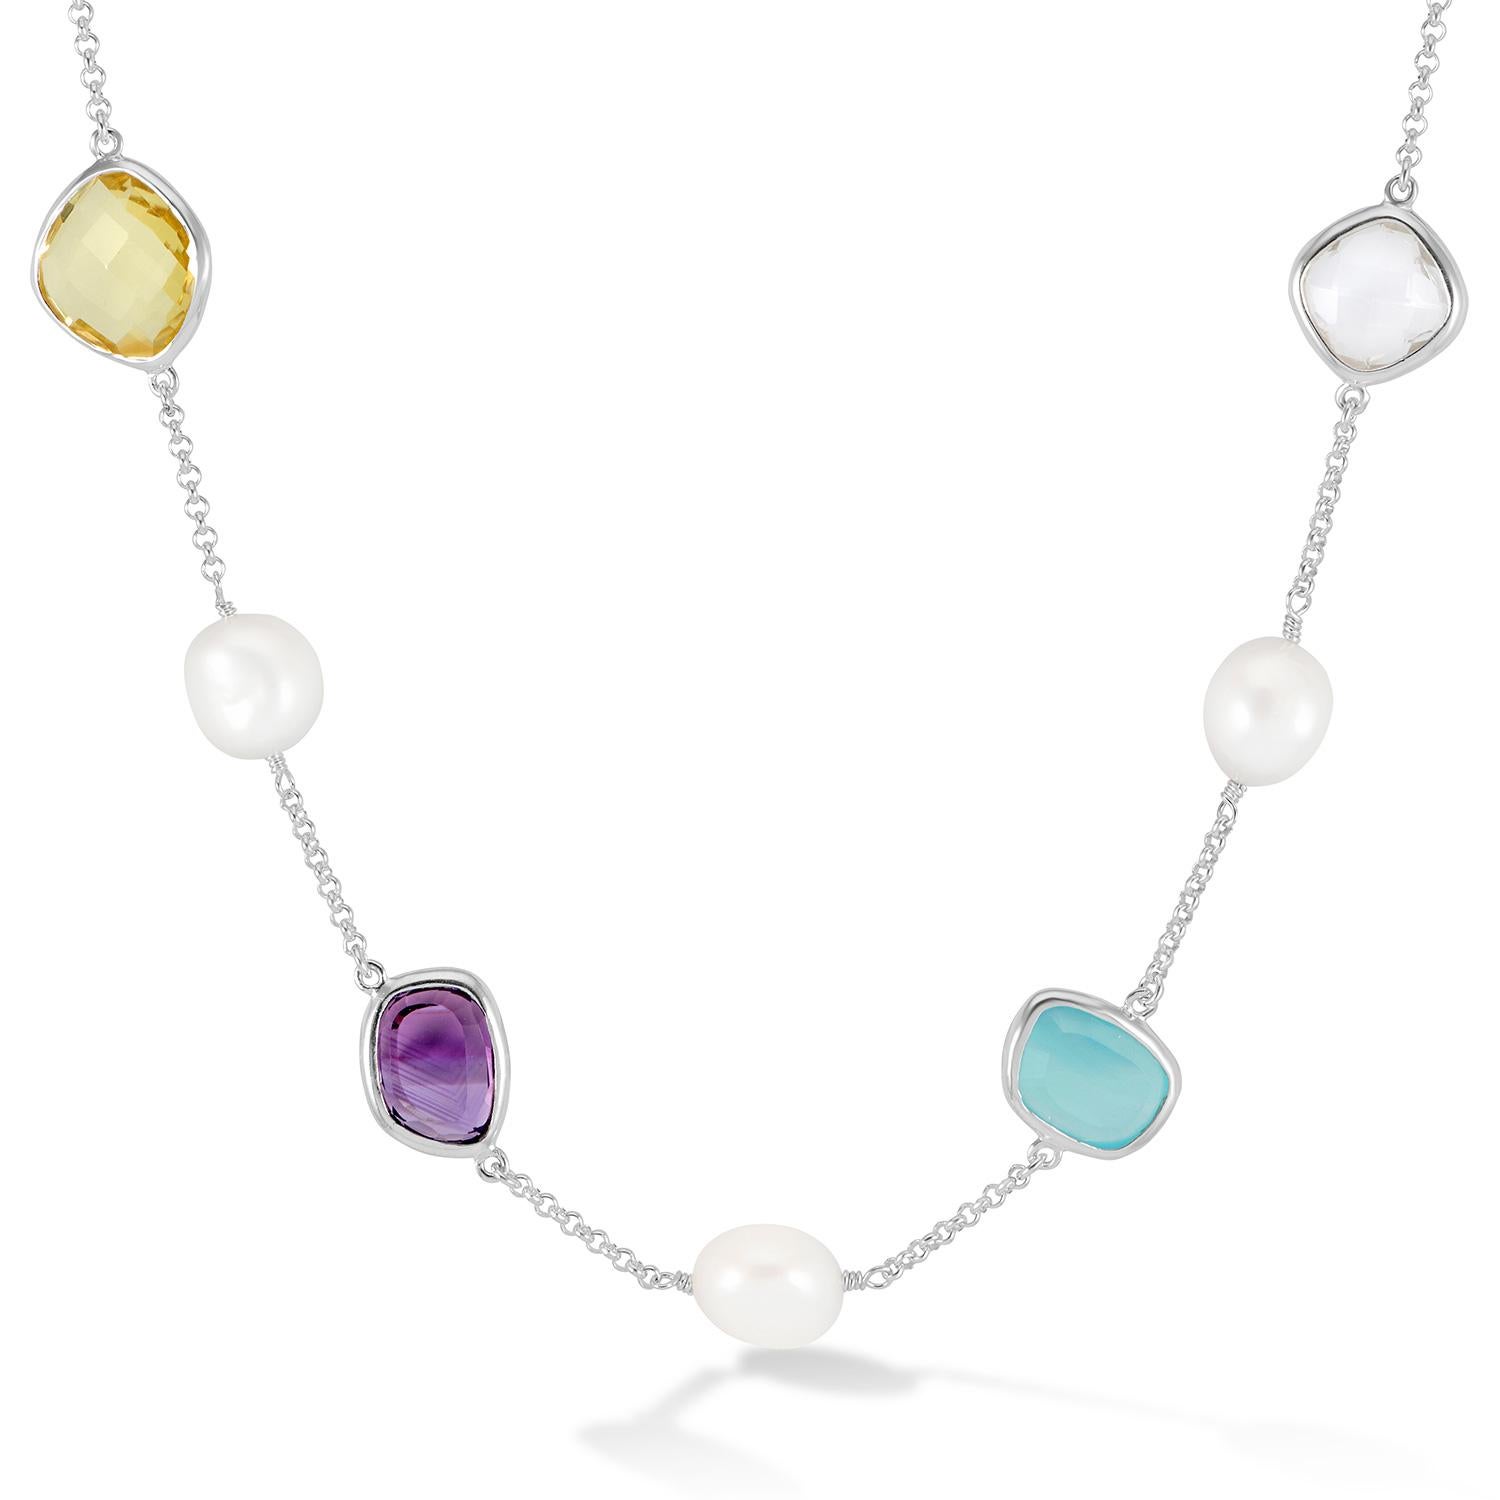 Handcrafted in sterling silver, this chain necklace is adorned with five white baroque pearls and four faceted gemstones in a mix of amethyst, rock crystal, lemon quartz and green chalcedony. Baroque pearls are naturally irregular in shape and known